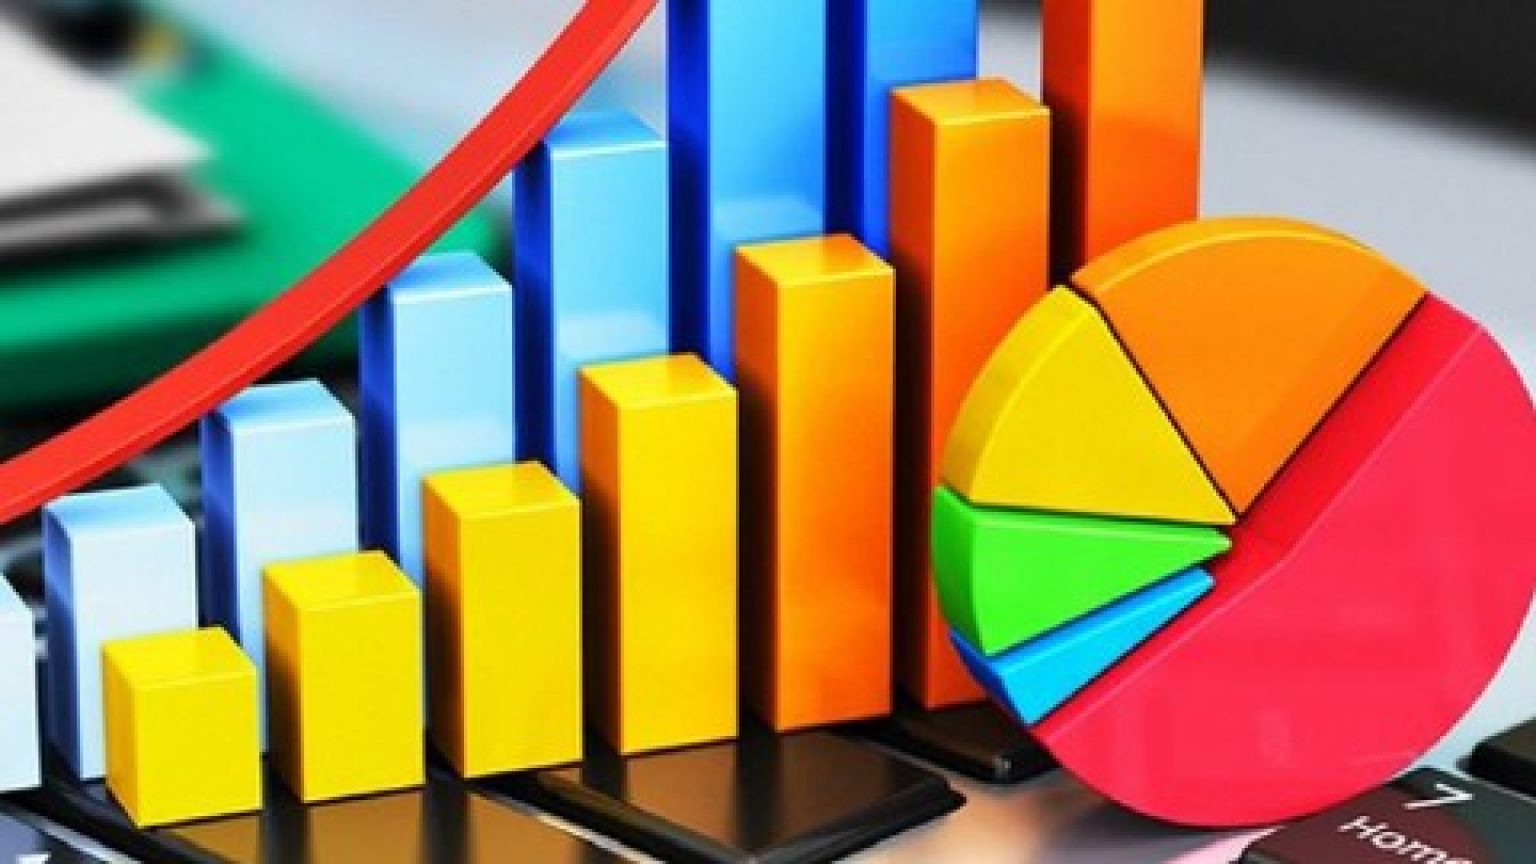 [100% OFF] Introduction to Statistics / Biostatistics with Certificate ...